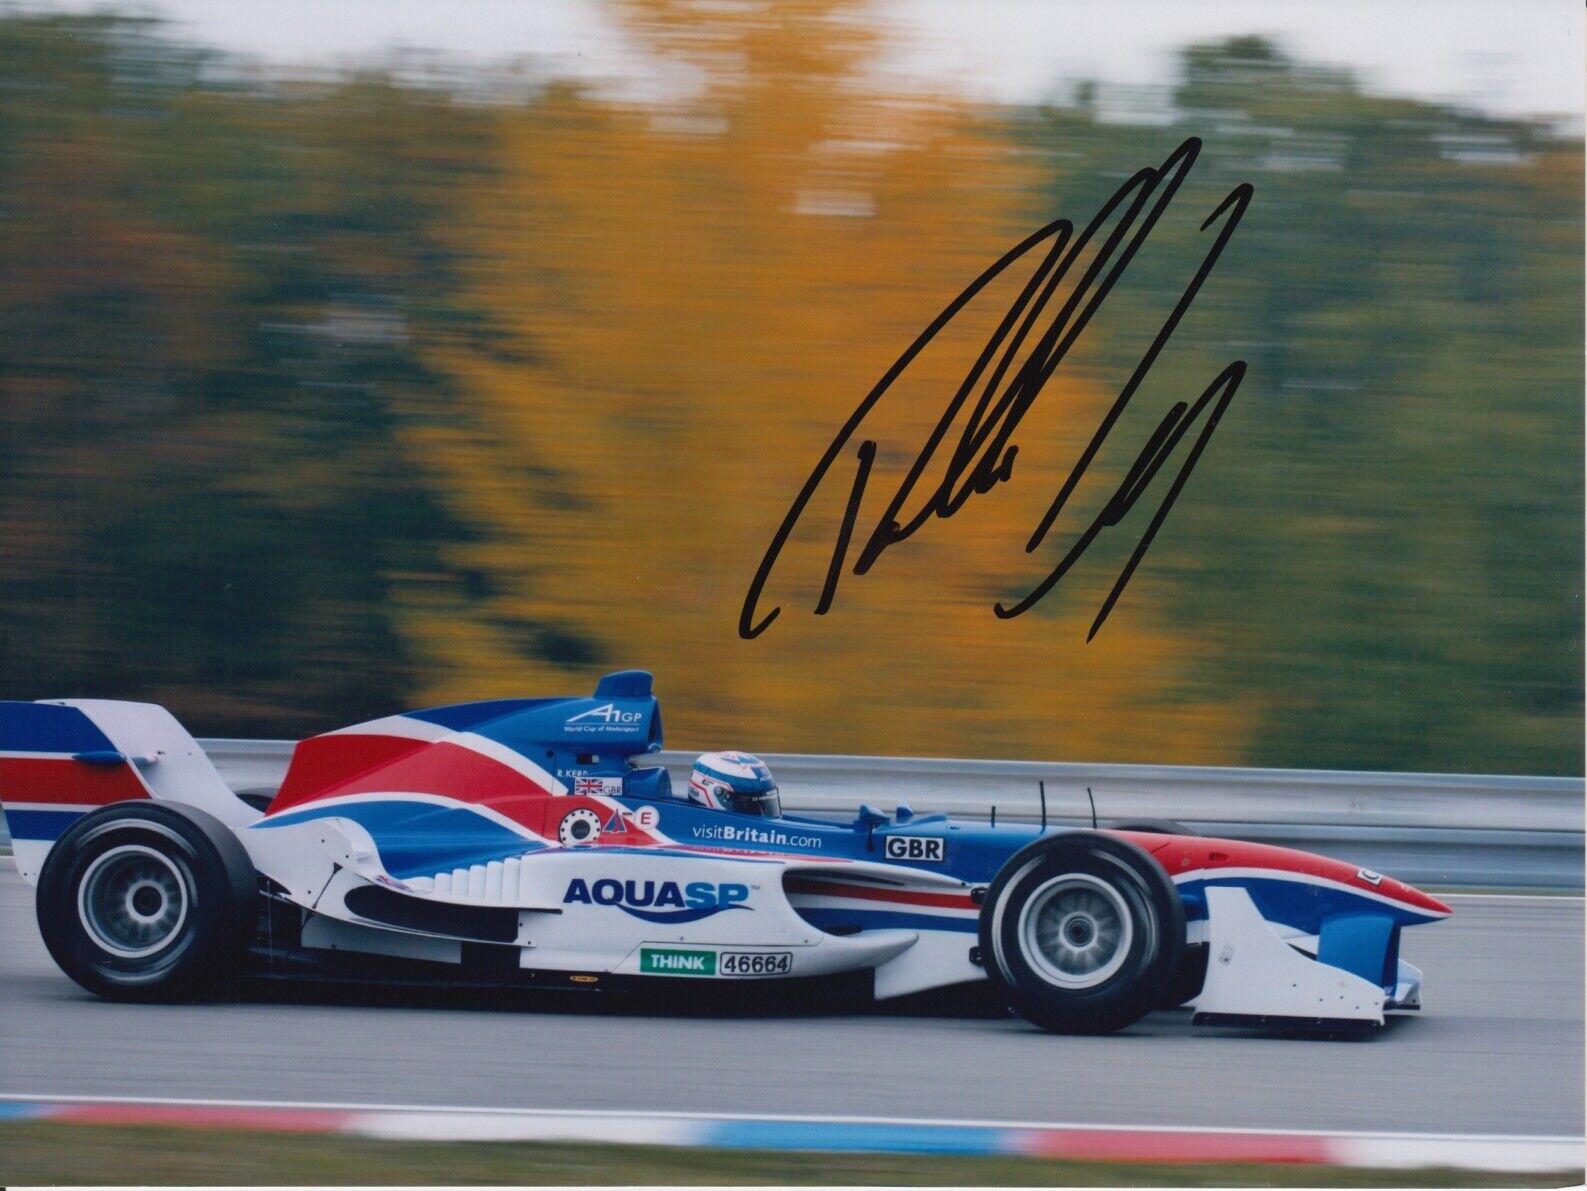 Robbie Kerr Hand Signed 8x6 Photo Poster painting - Renault World Series Autograph 17.